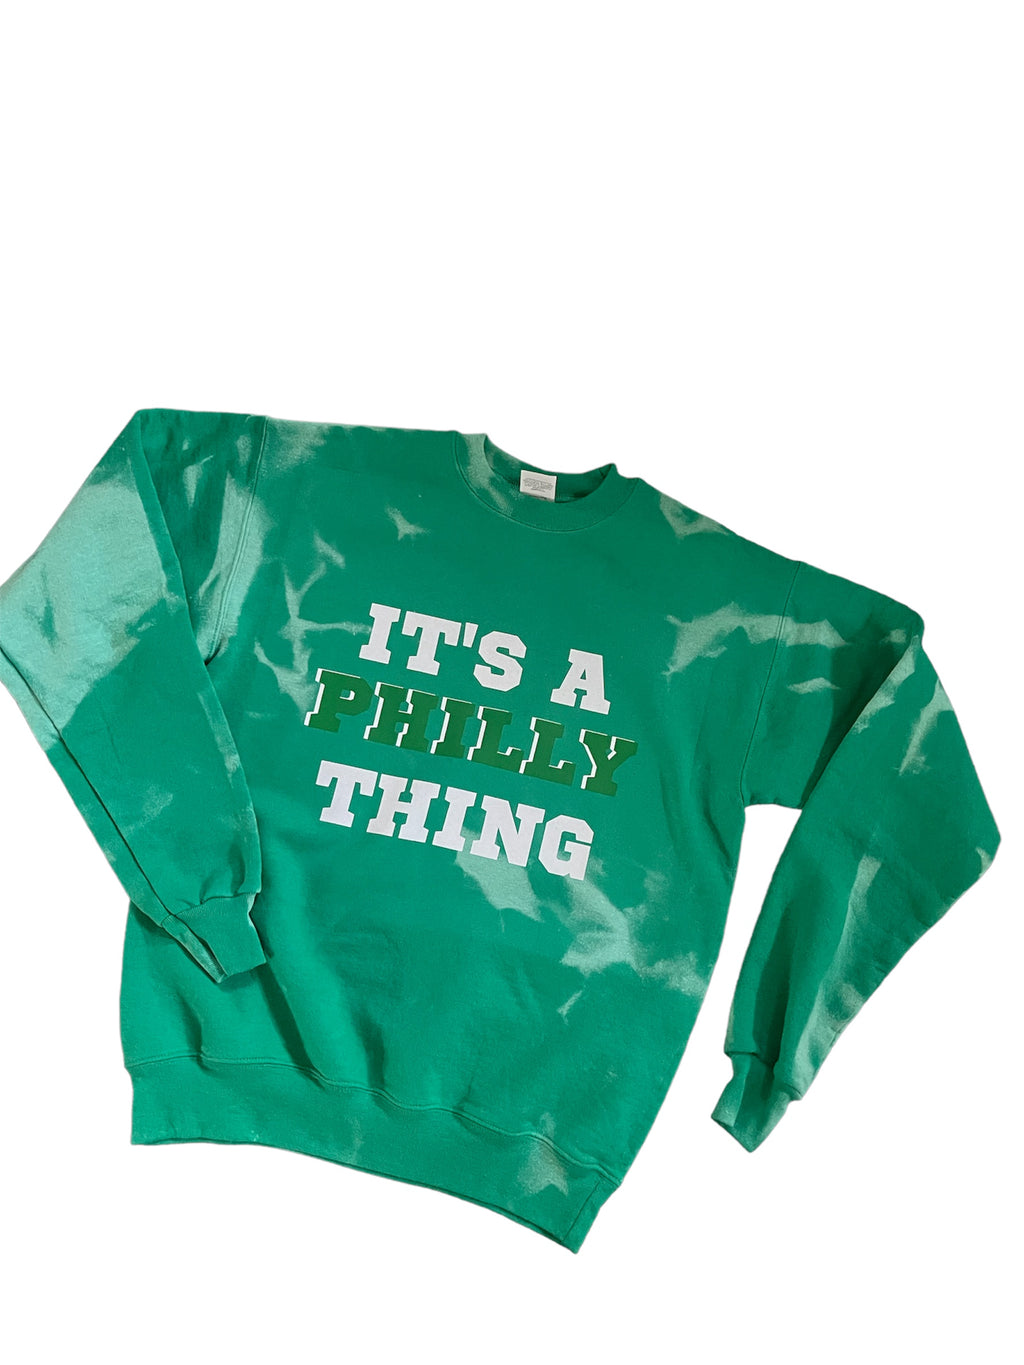 It’s a Philly Thing Crew Sweatshirt